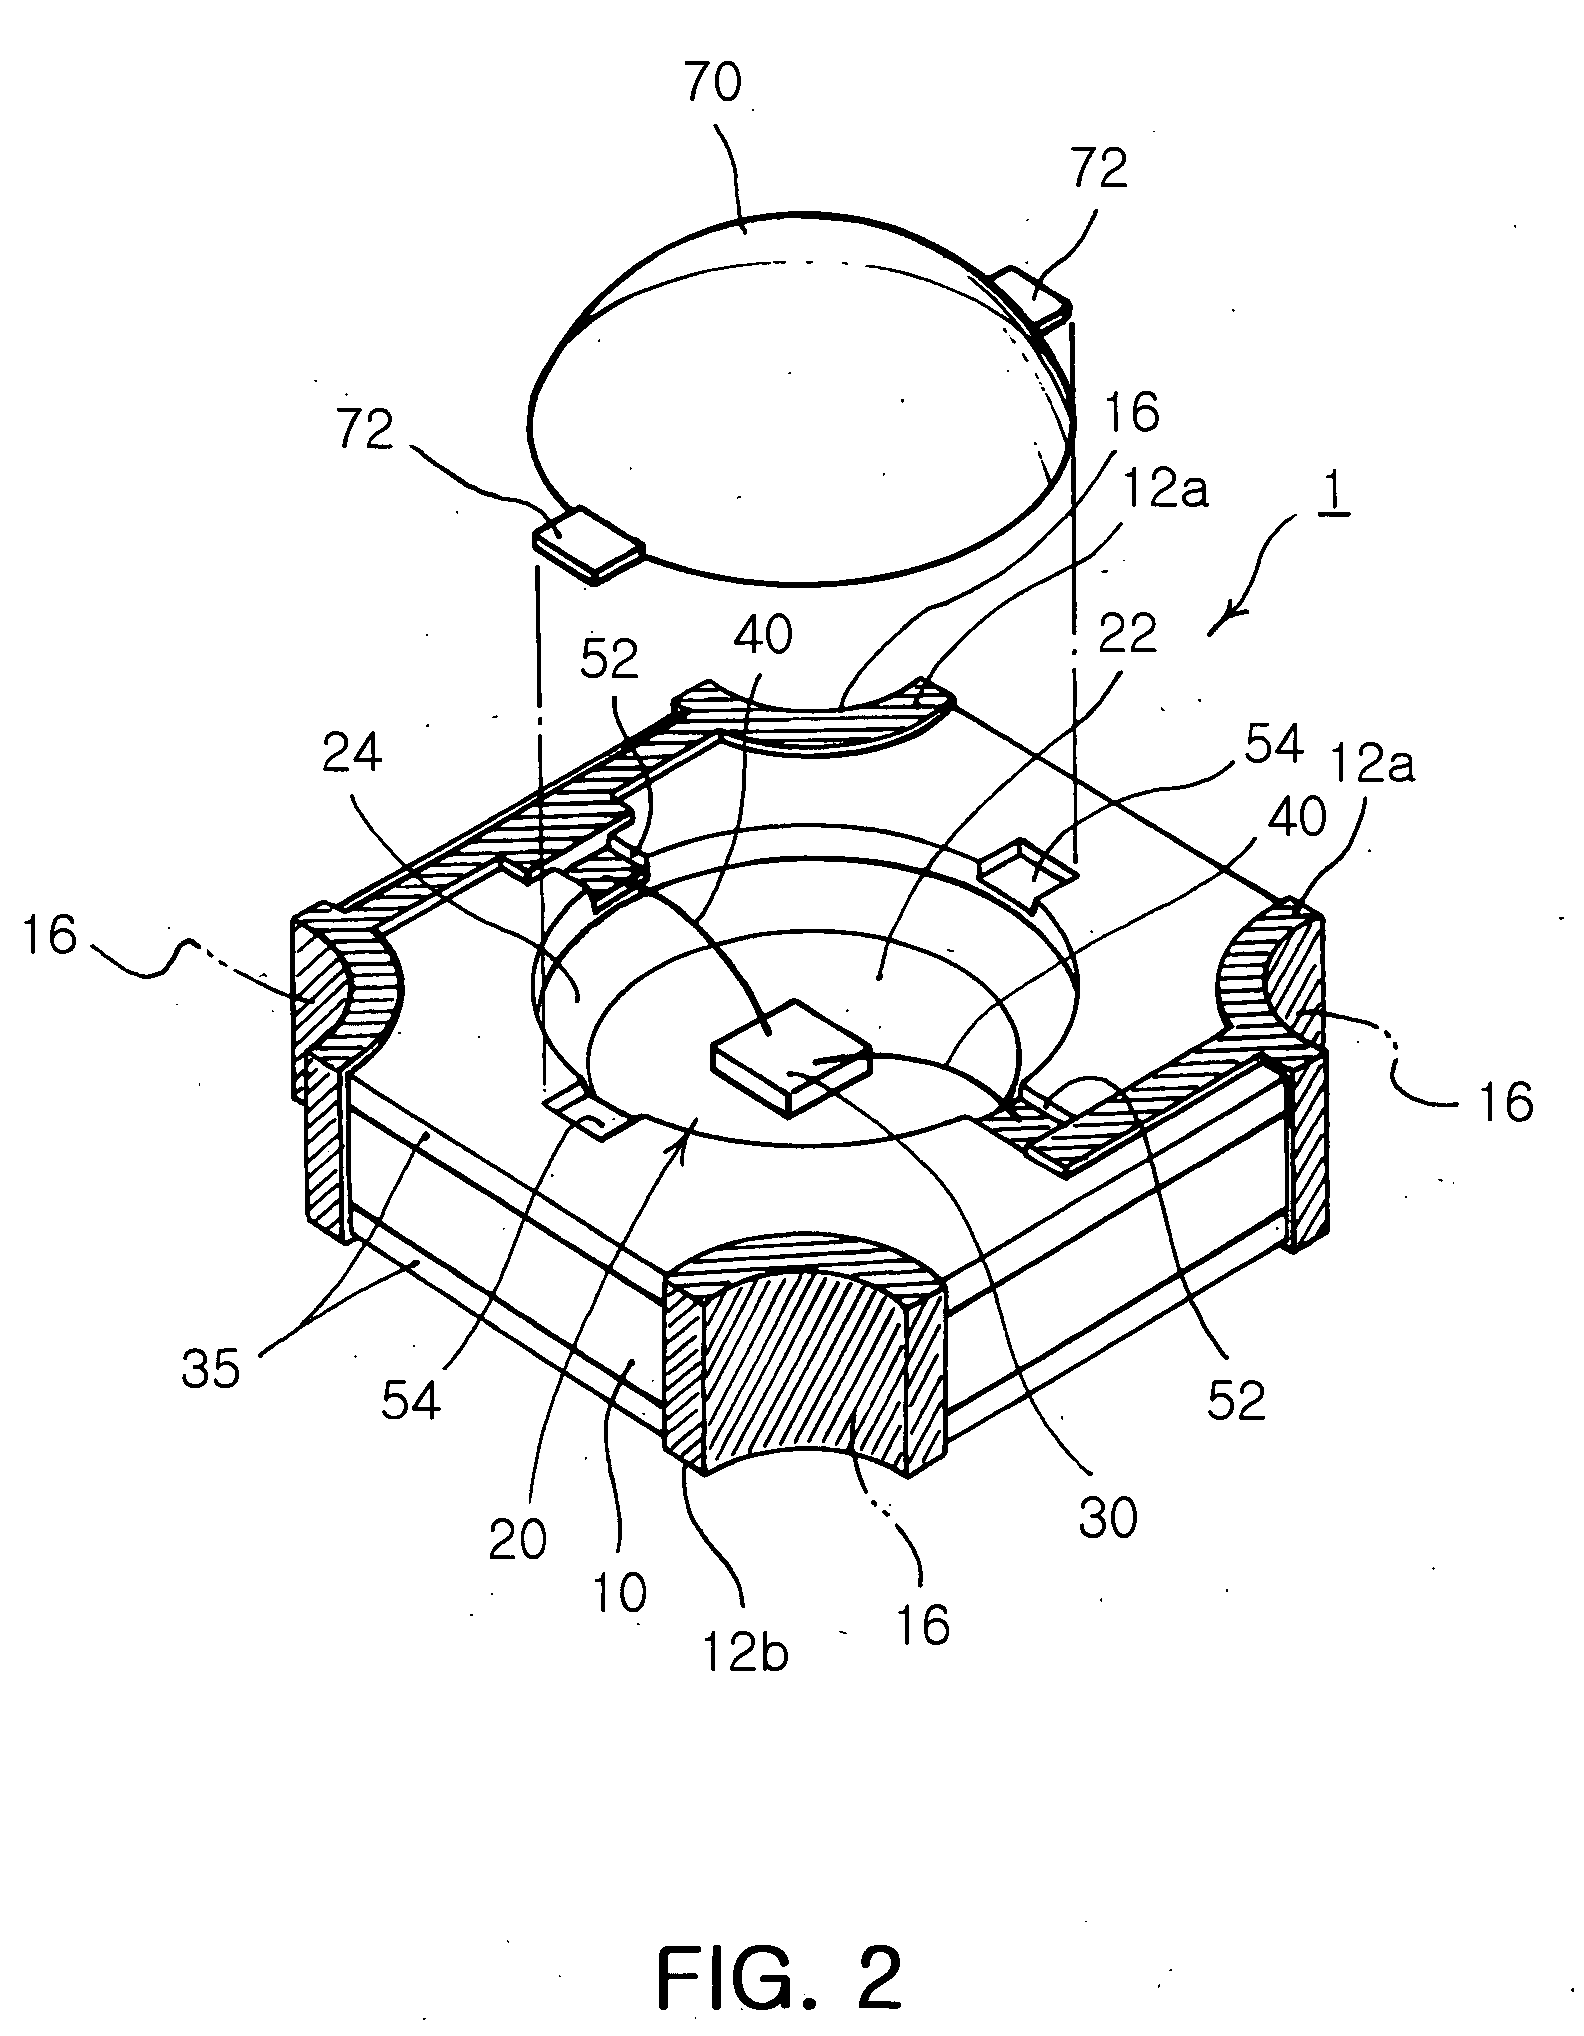 Light emitting diode package having anodized insulation layer and fabrication method therefor